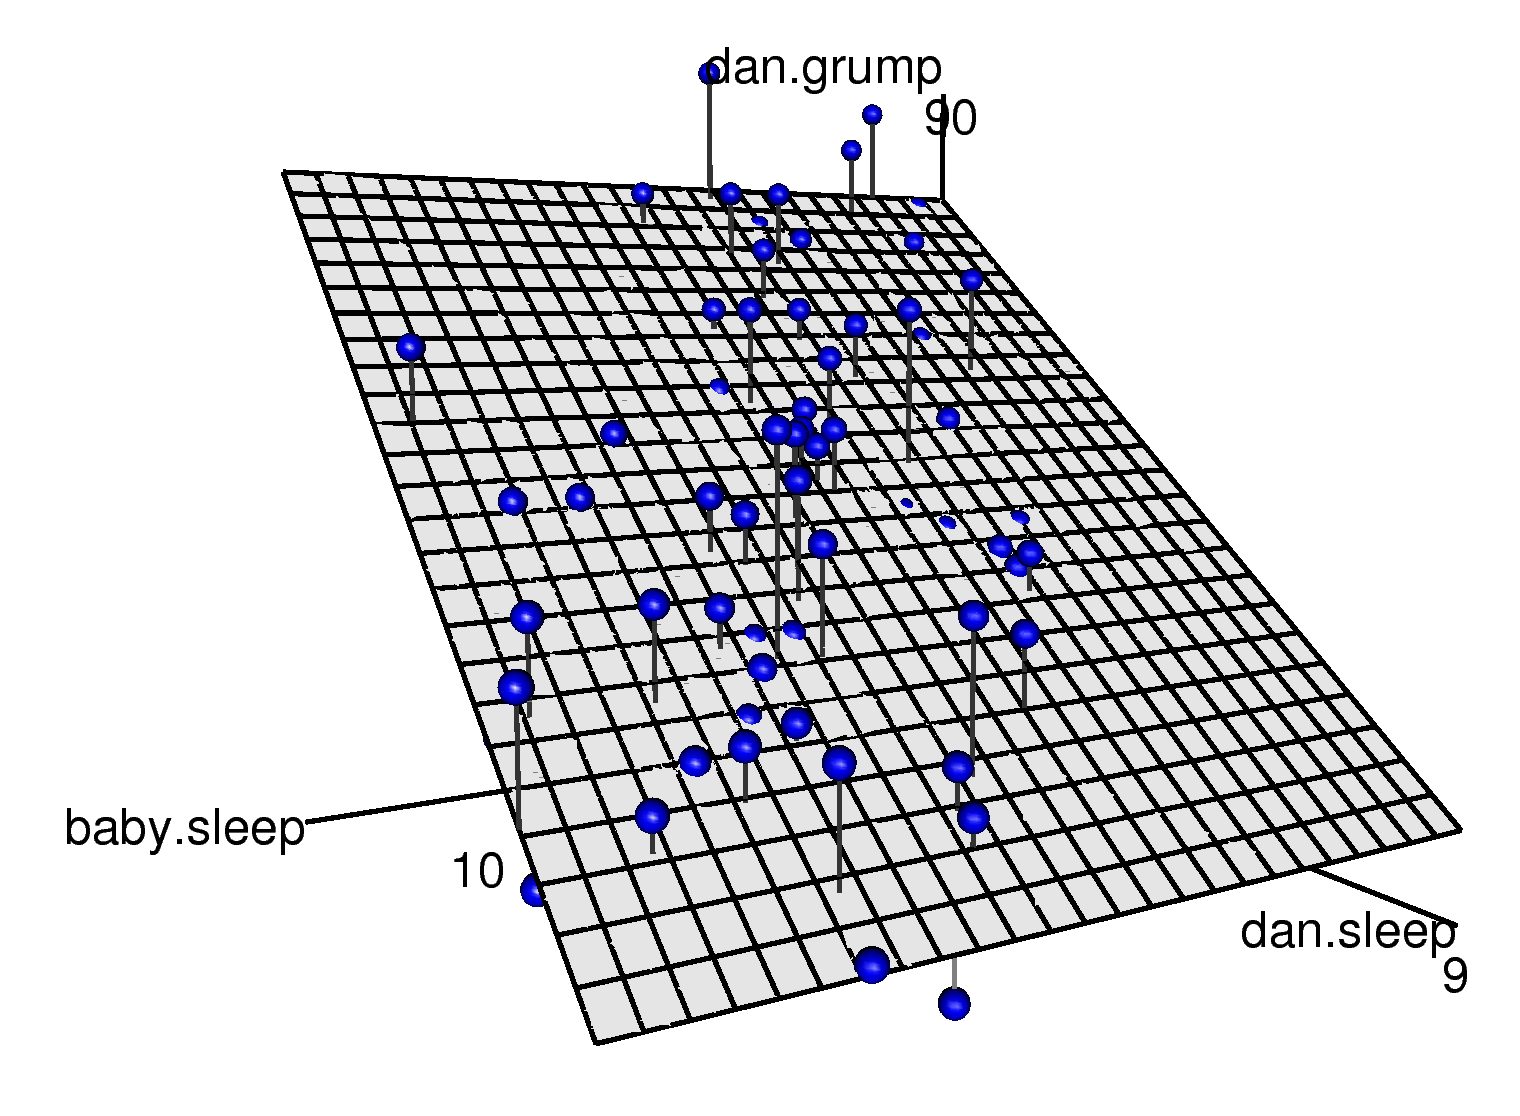 A 3D visualisation of a multiple regression model. There are two predictors in the model, `dan.sleep` and `baby.sleep`; the outcome variable is `dan.grump`. Together, these three variables form a 3D space: each observation (blue dots) is a point in this space. In much the same way that a simple linear regression model forms a line in 2D space, this multiple regression model forms a plane in 3D space. When we estimate the regression coefficients, what we're trying to do is find a plane that is as close to all the blue dots as possible.